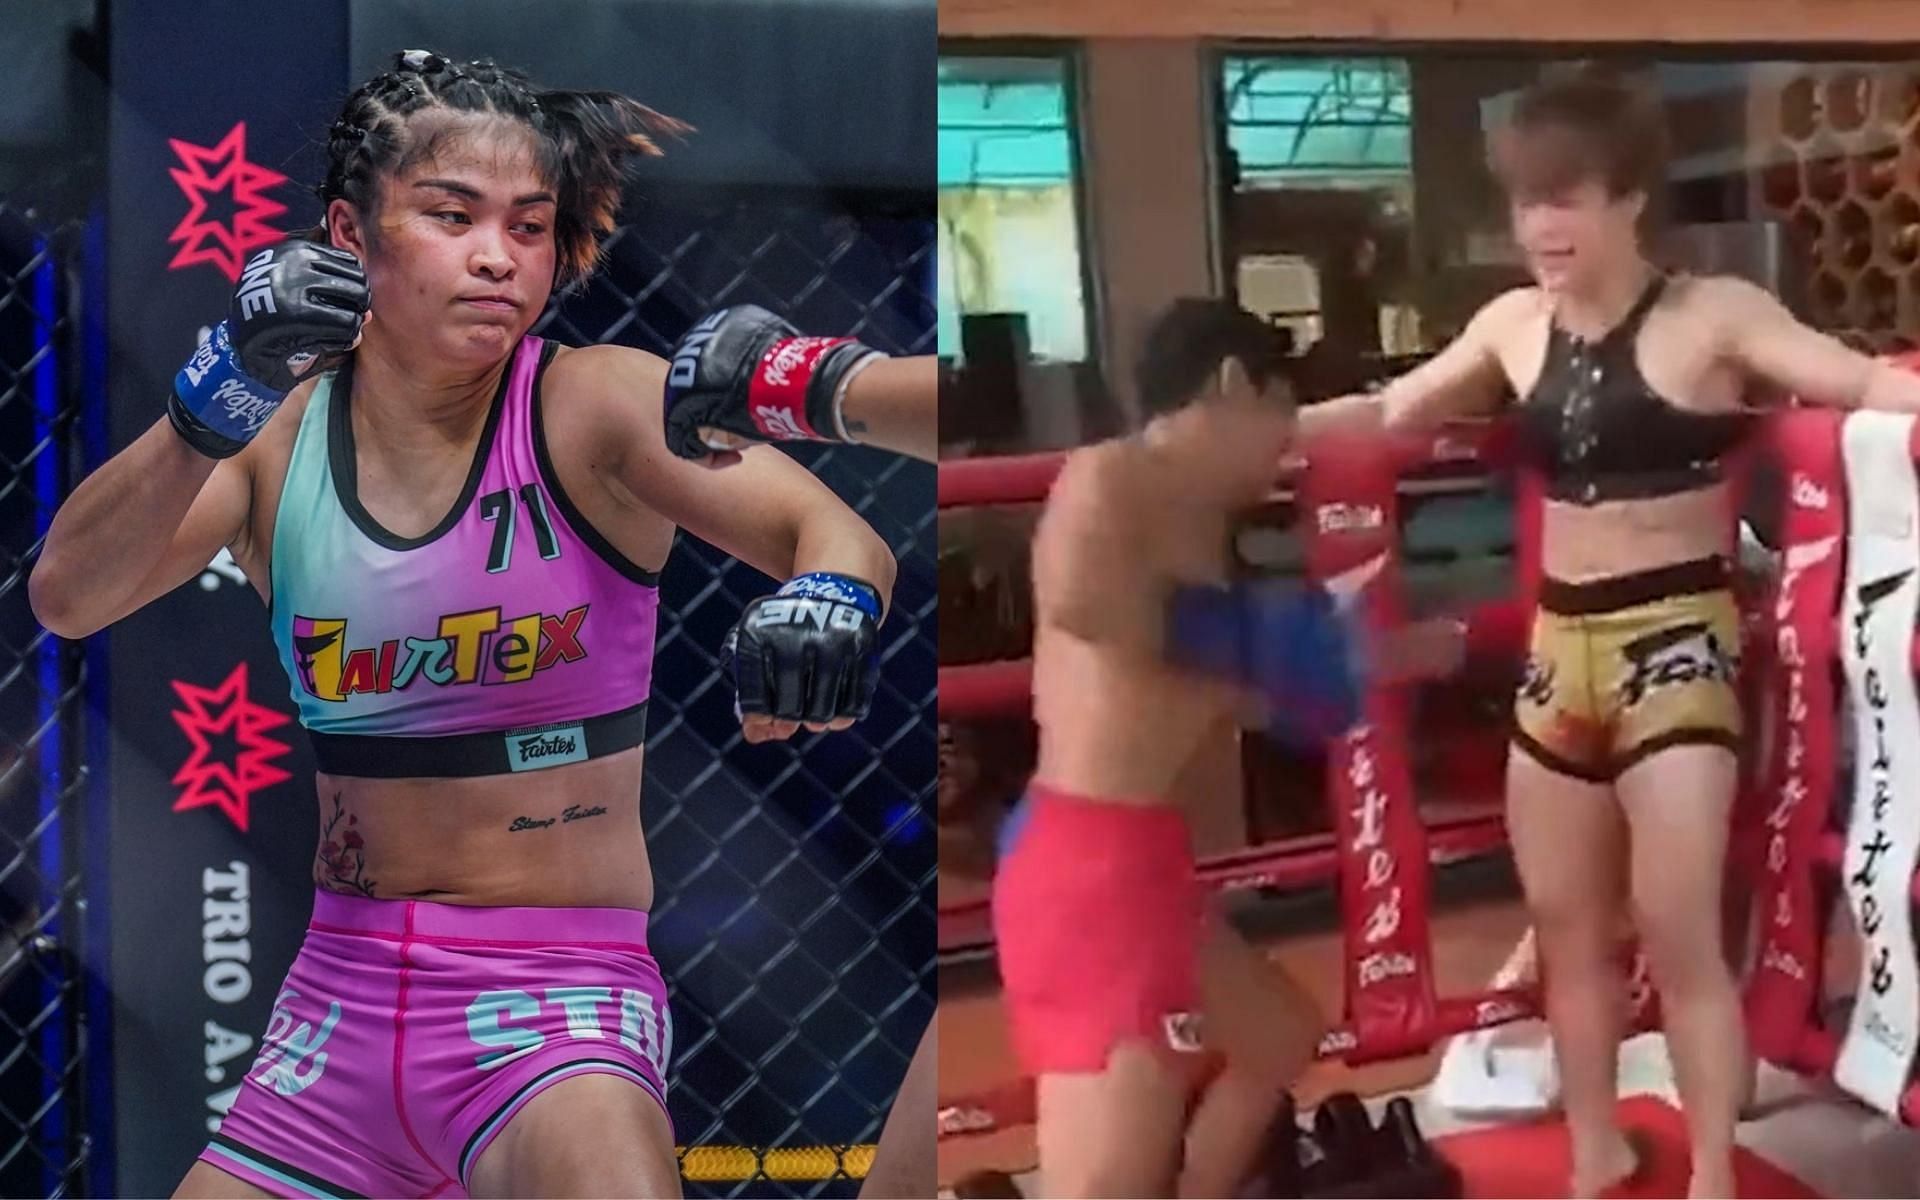 Stamp Fairtex trains her mid-section by deliberately absorbing hard body shots. (Image courtesy: ONE Championship, @stamp_fairtex on Instagram)